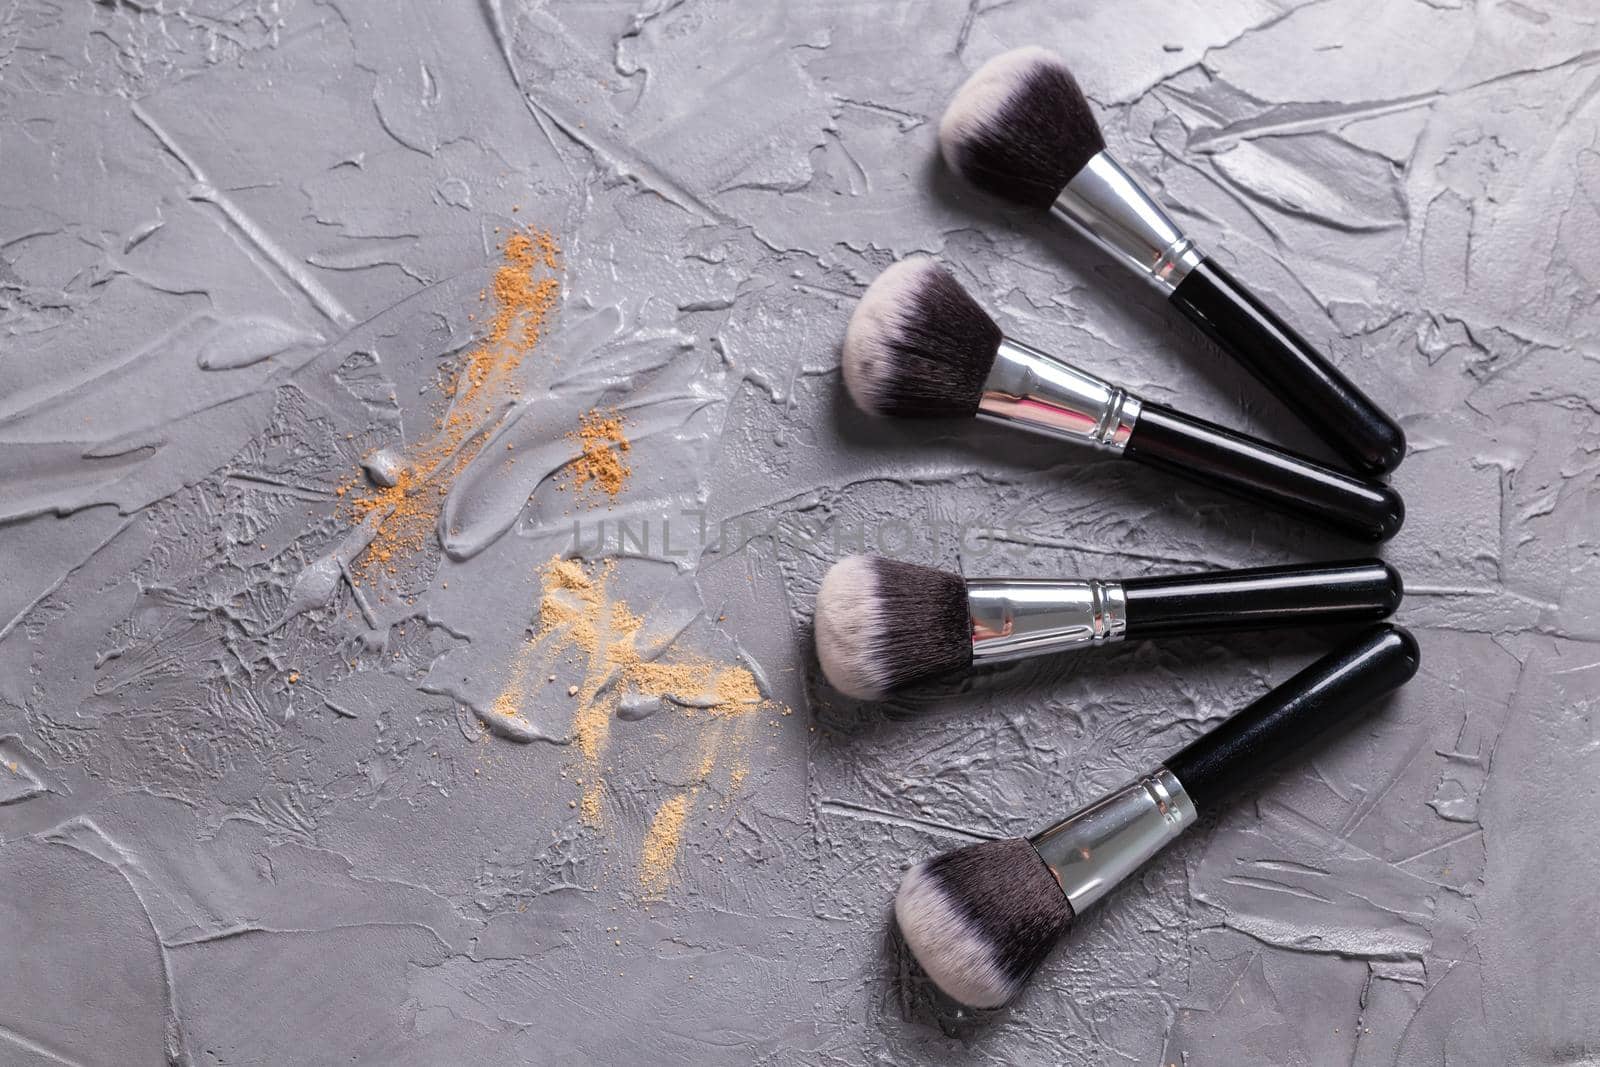 Mineral powder of different colors with a brushes for make-up on wooden background